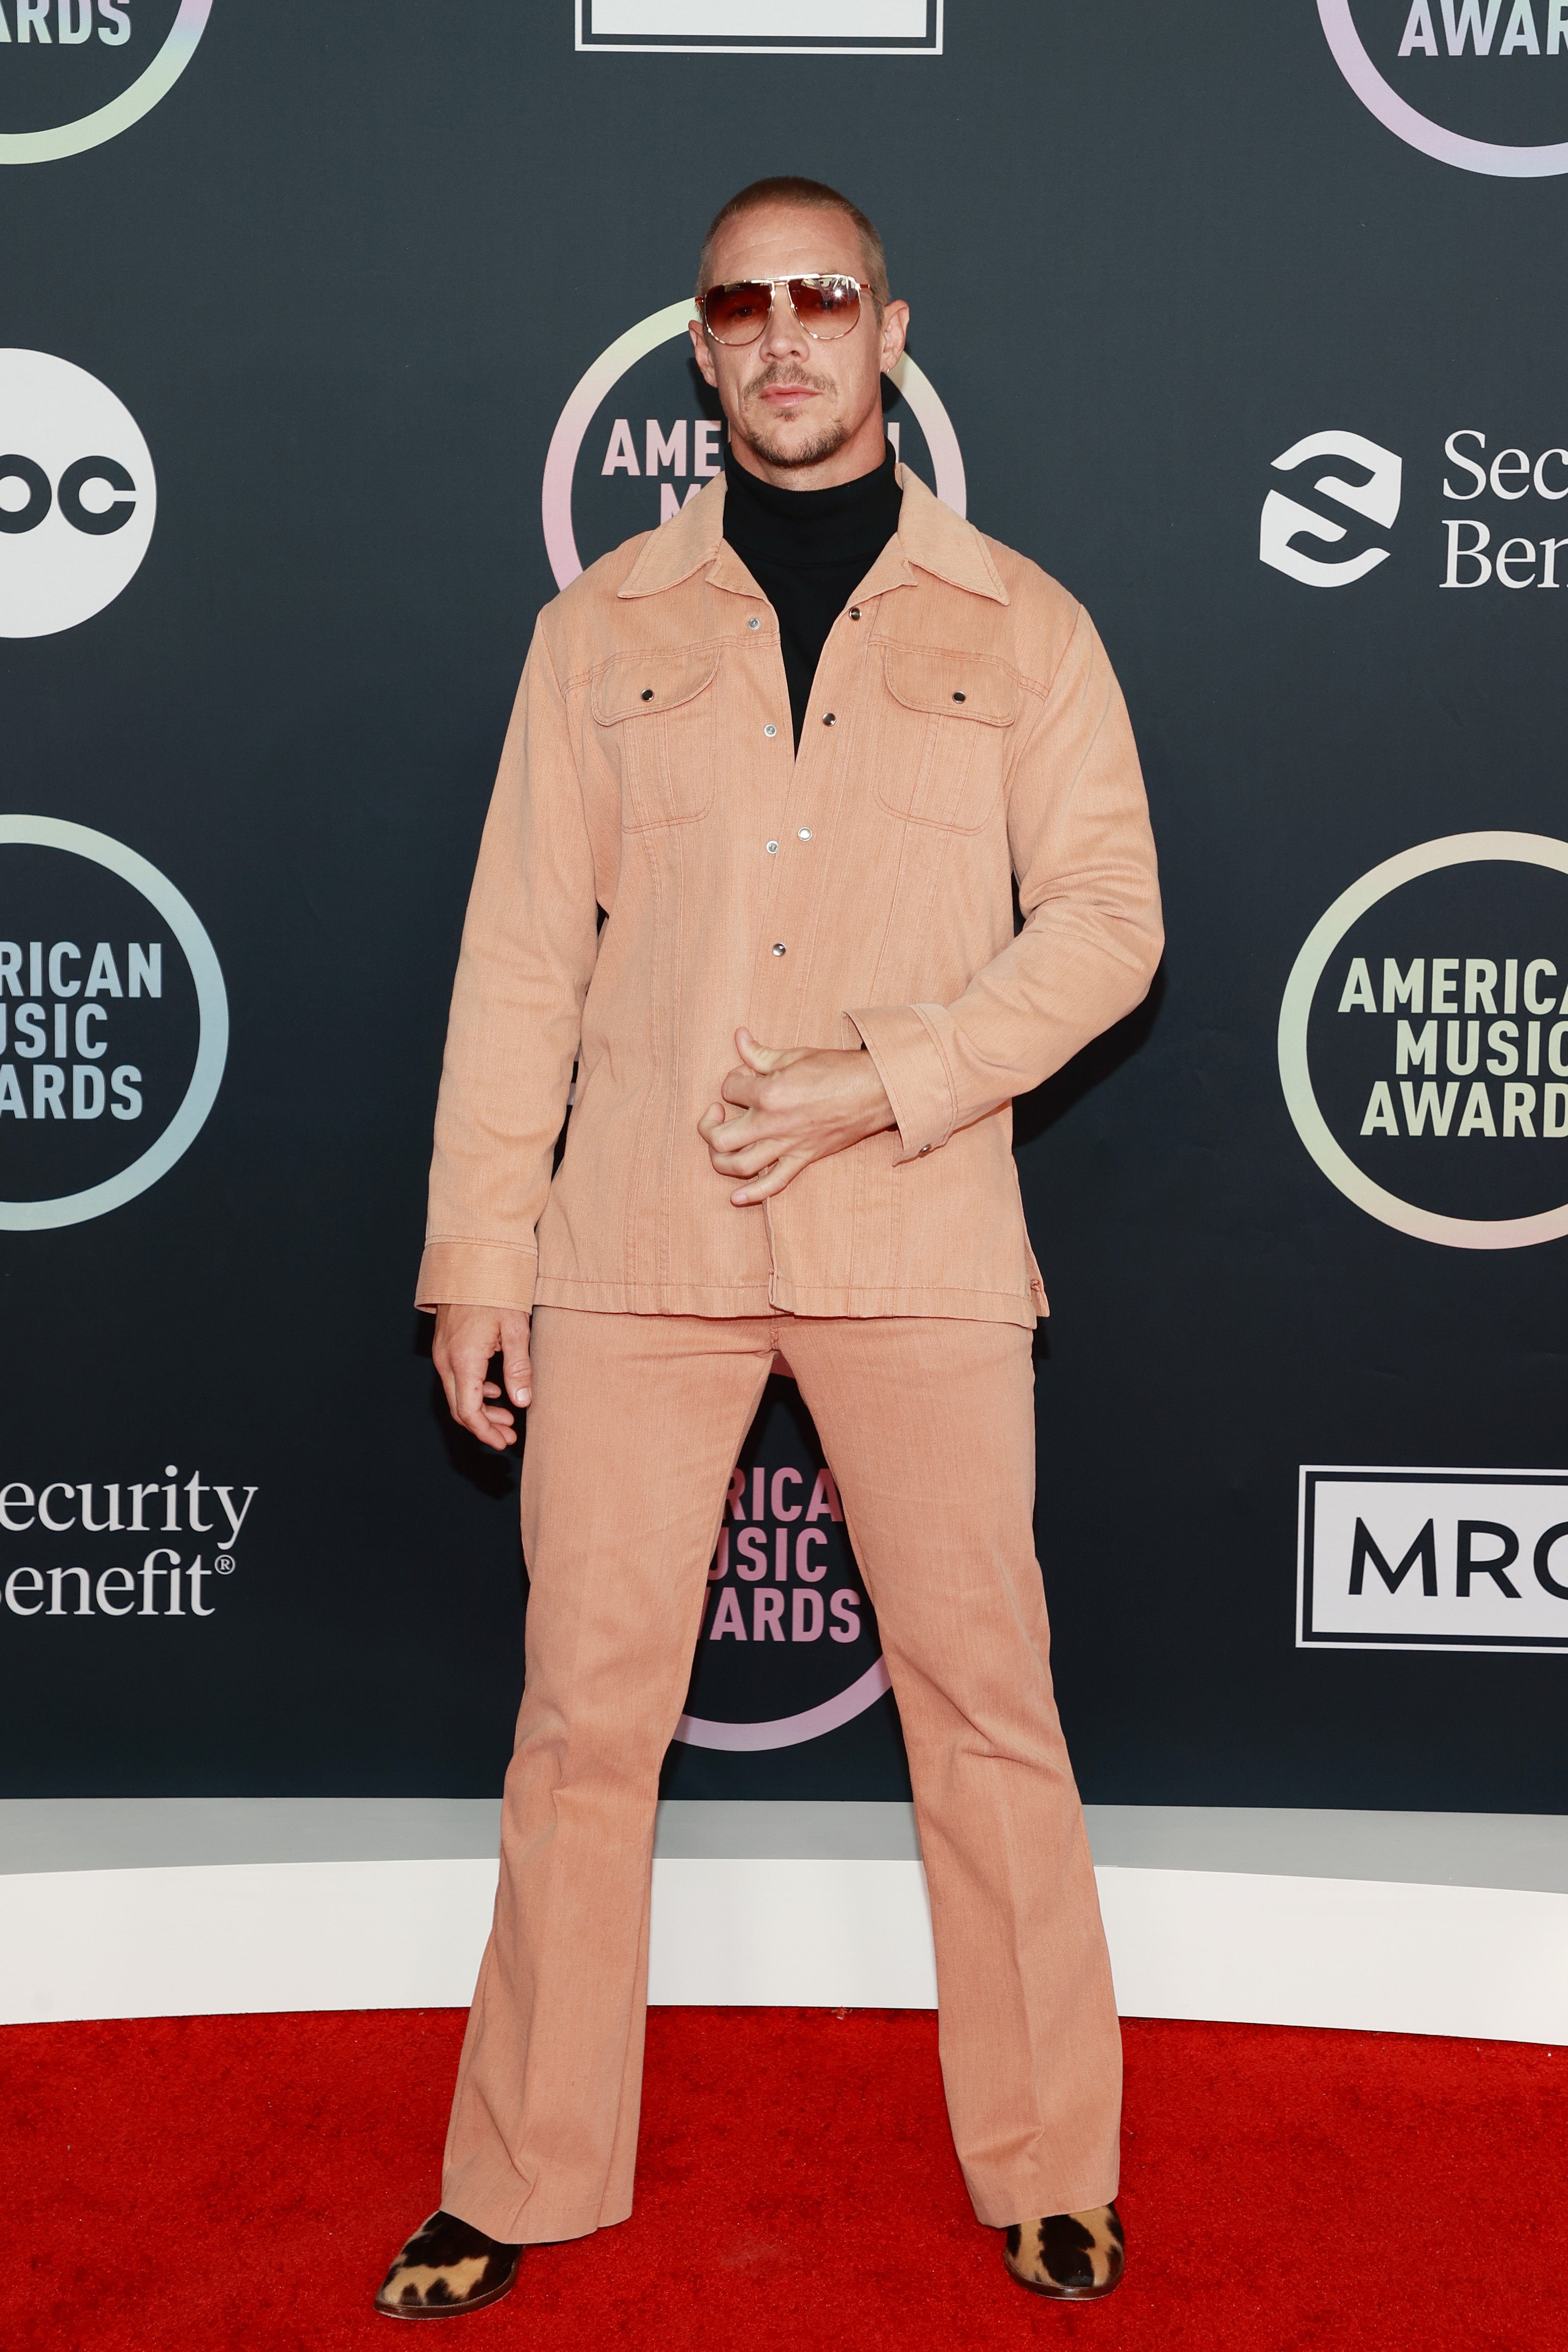 Diplo chose a pale peach suit, which he paired with animal-print shoes